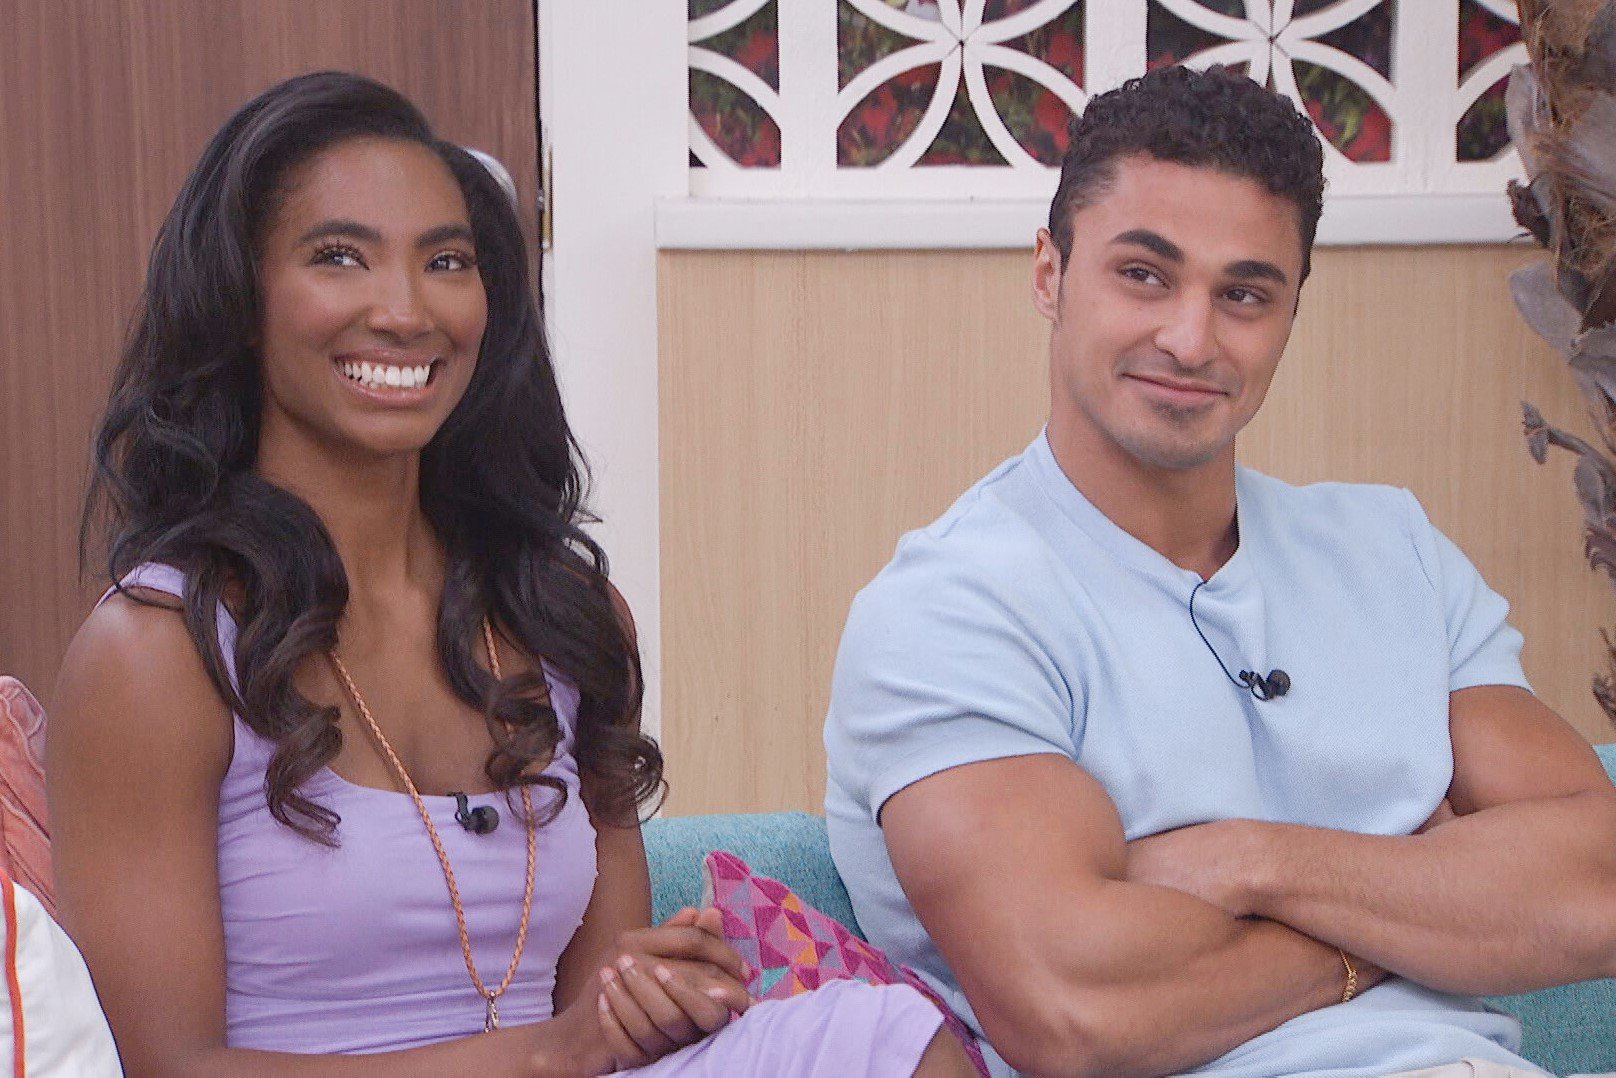 Taylor Hale and Joseph Abdin, who starred in 'Big Brother 24' on CBS, sit together on a couch. Taylor wears a light purple dress. Joseph wears a light blue shirt.